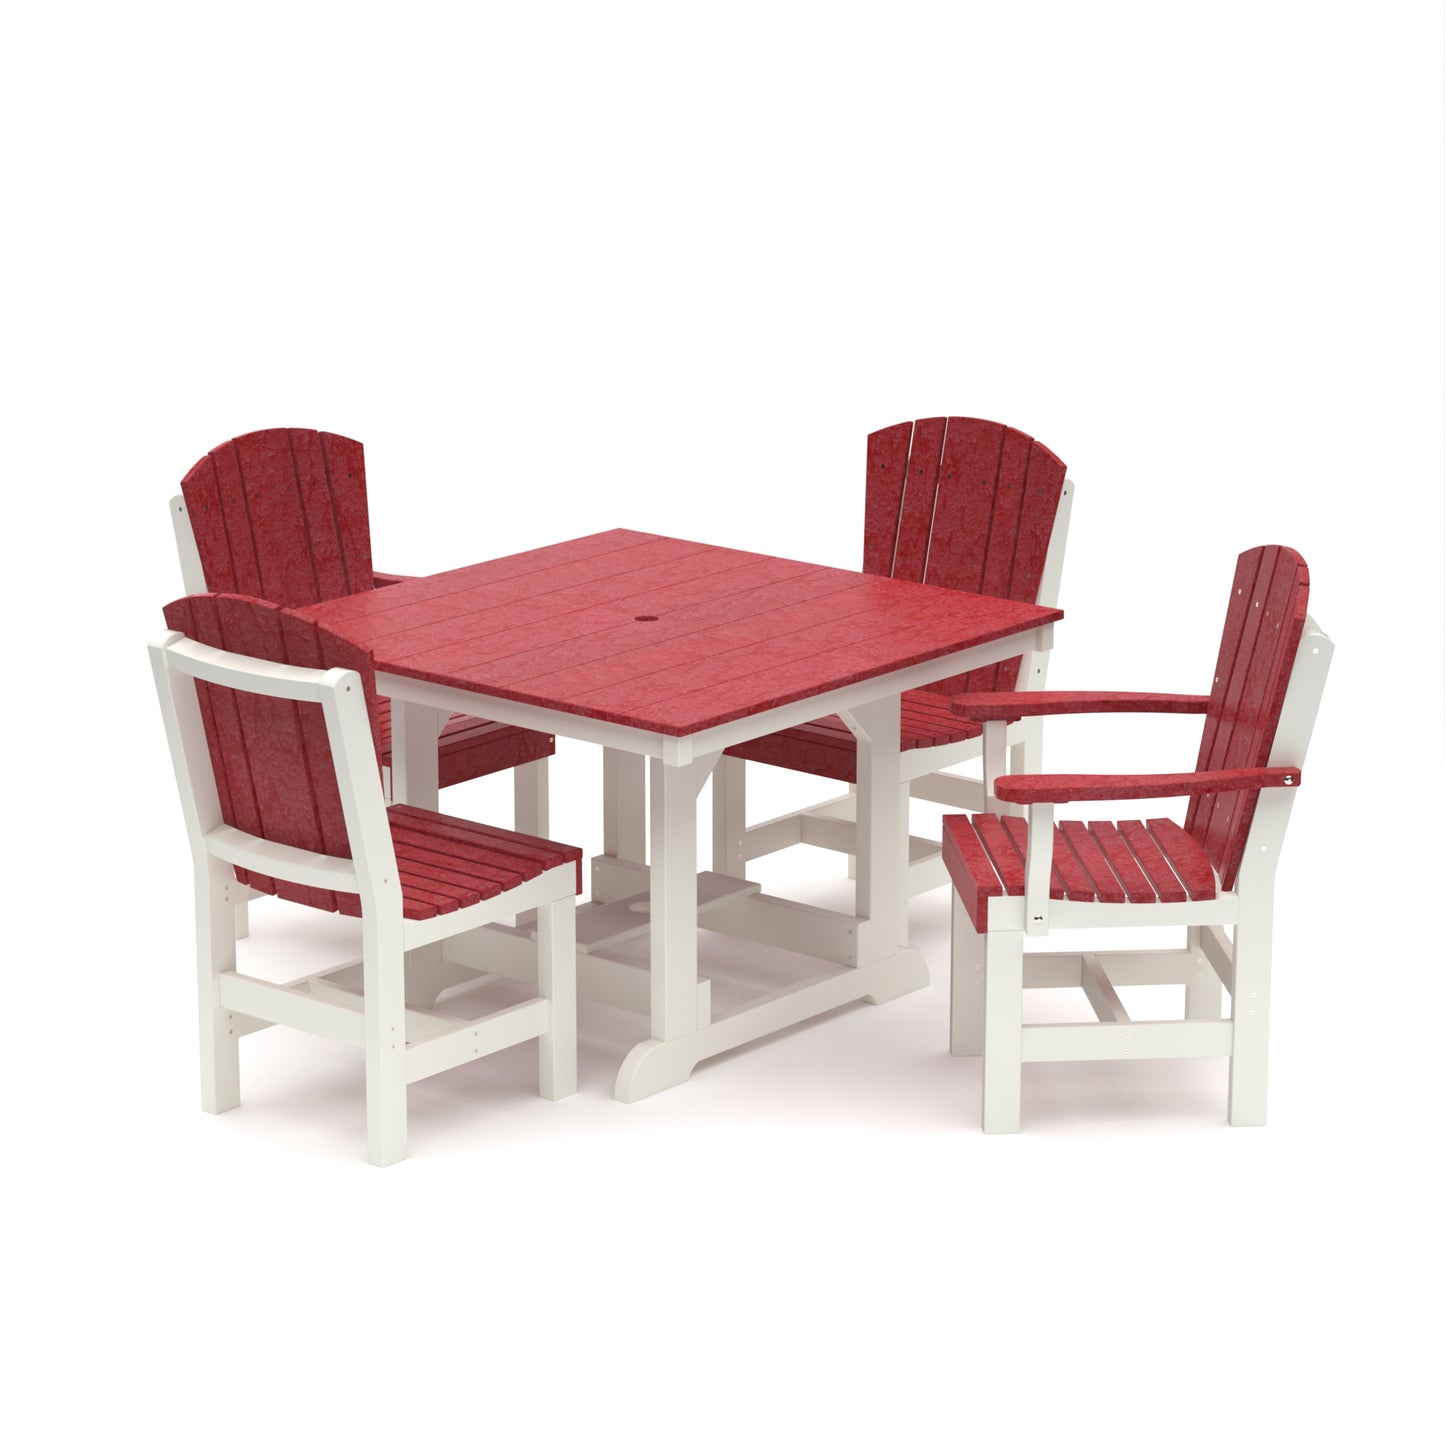 Wildridge Heritage Recycled Plastic 44x44 Table Set with 4 Dining Chairs - LEAD TIME TO SHIP 6 WEEKS OR LESS